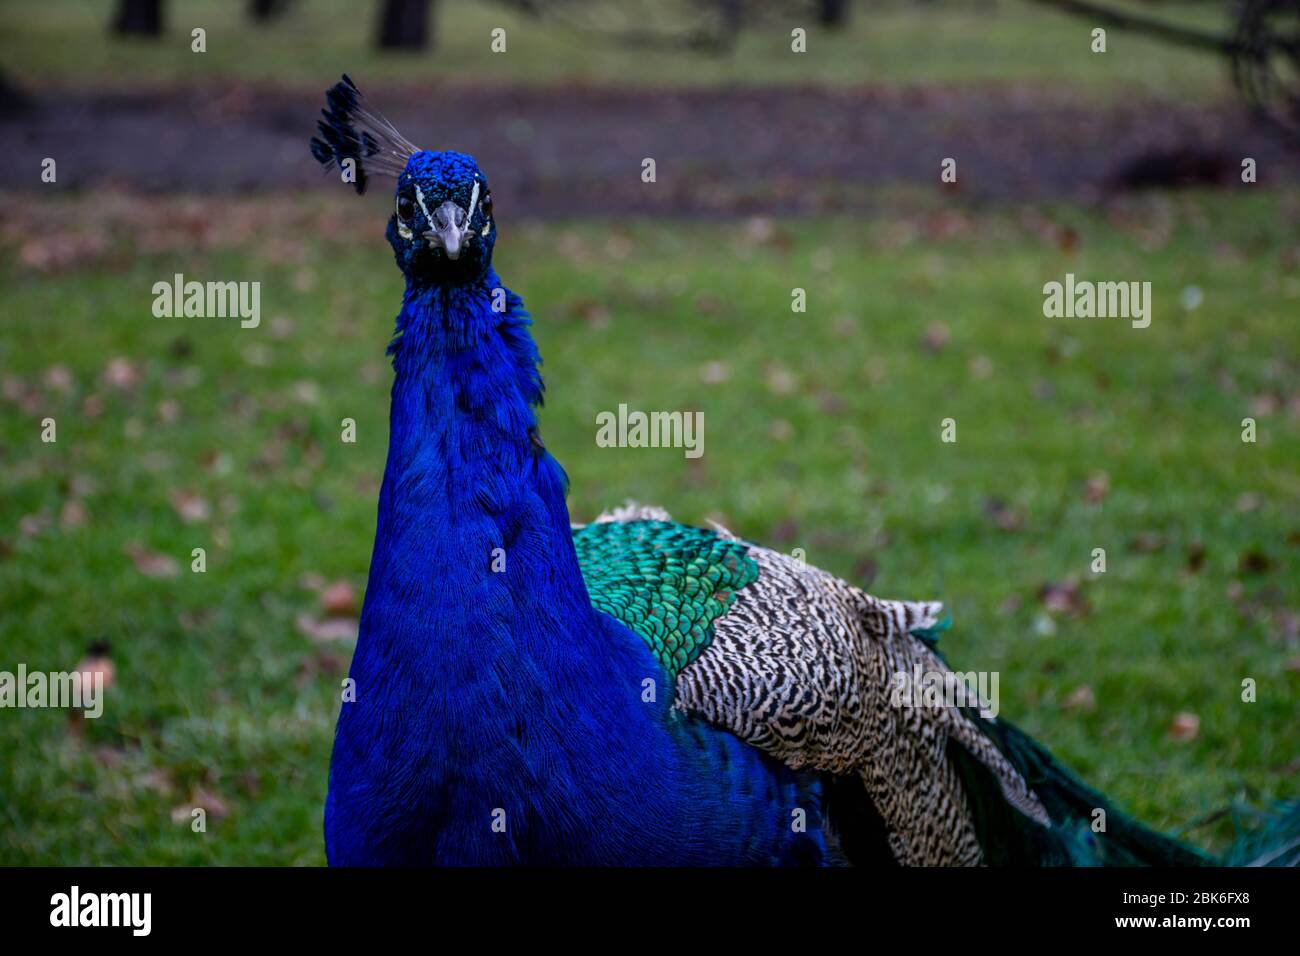 Portrait of peafowl (peacock) in park Stock Photo